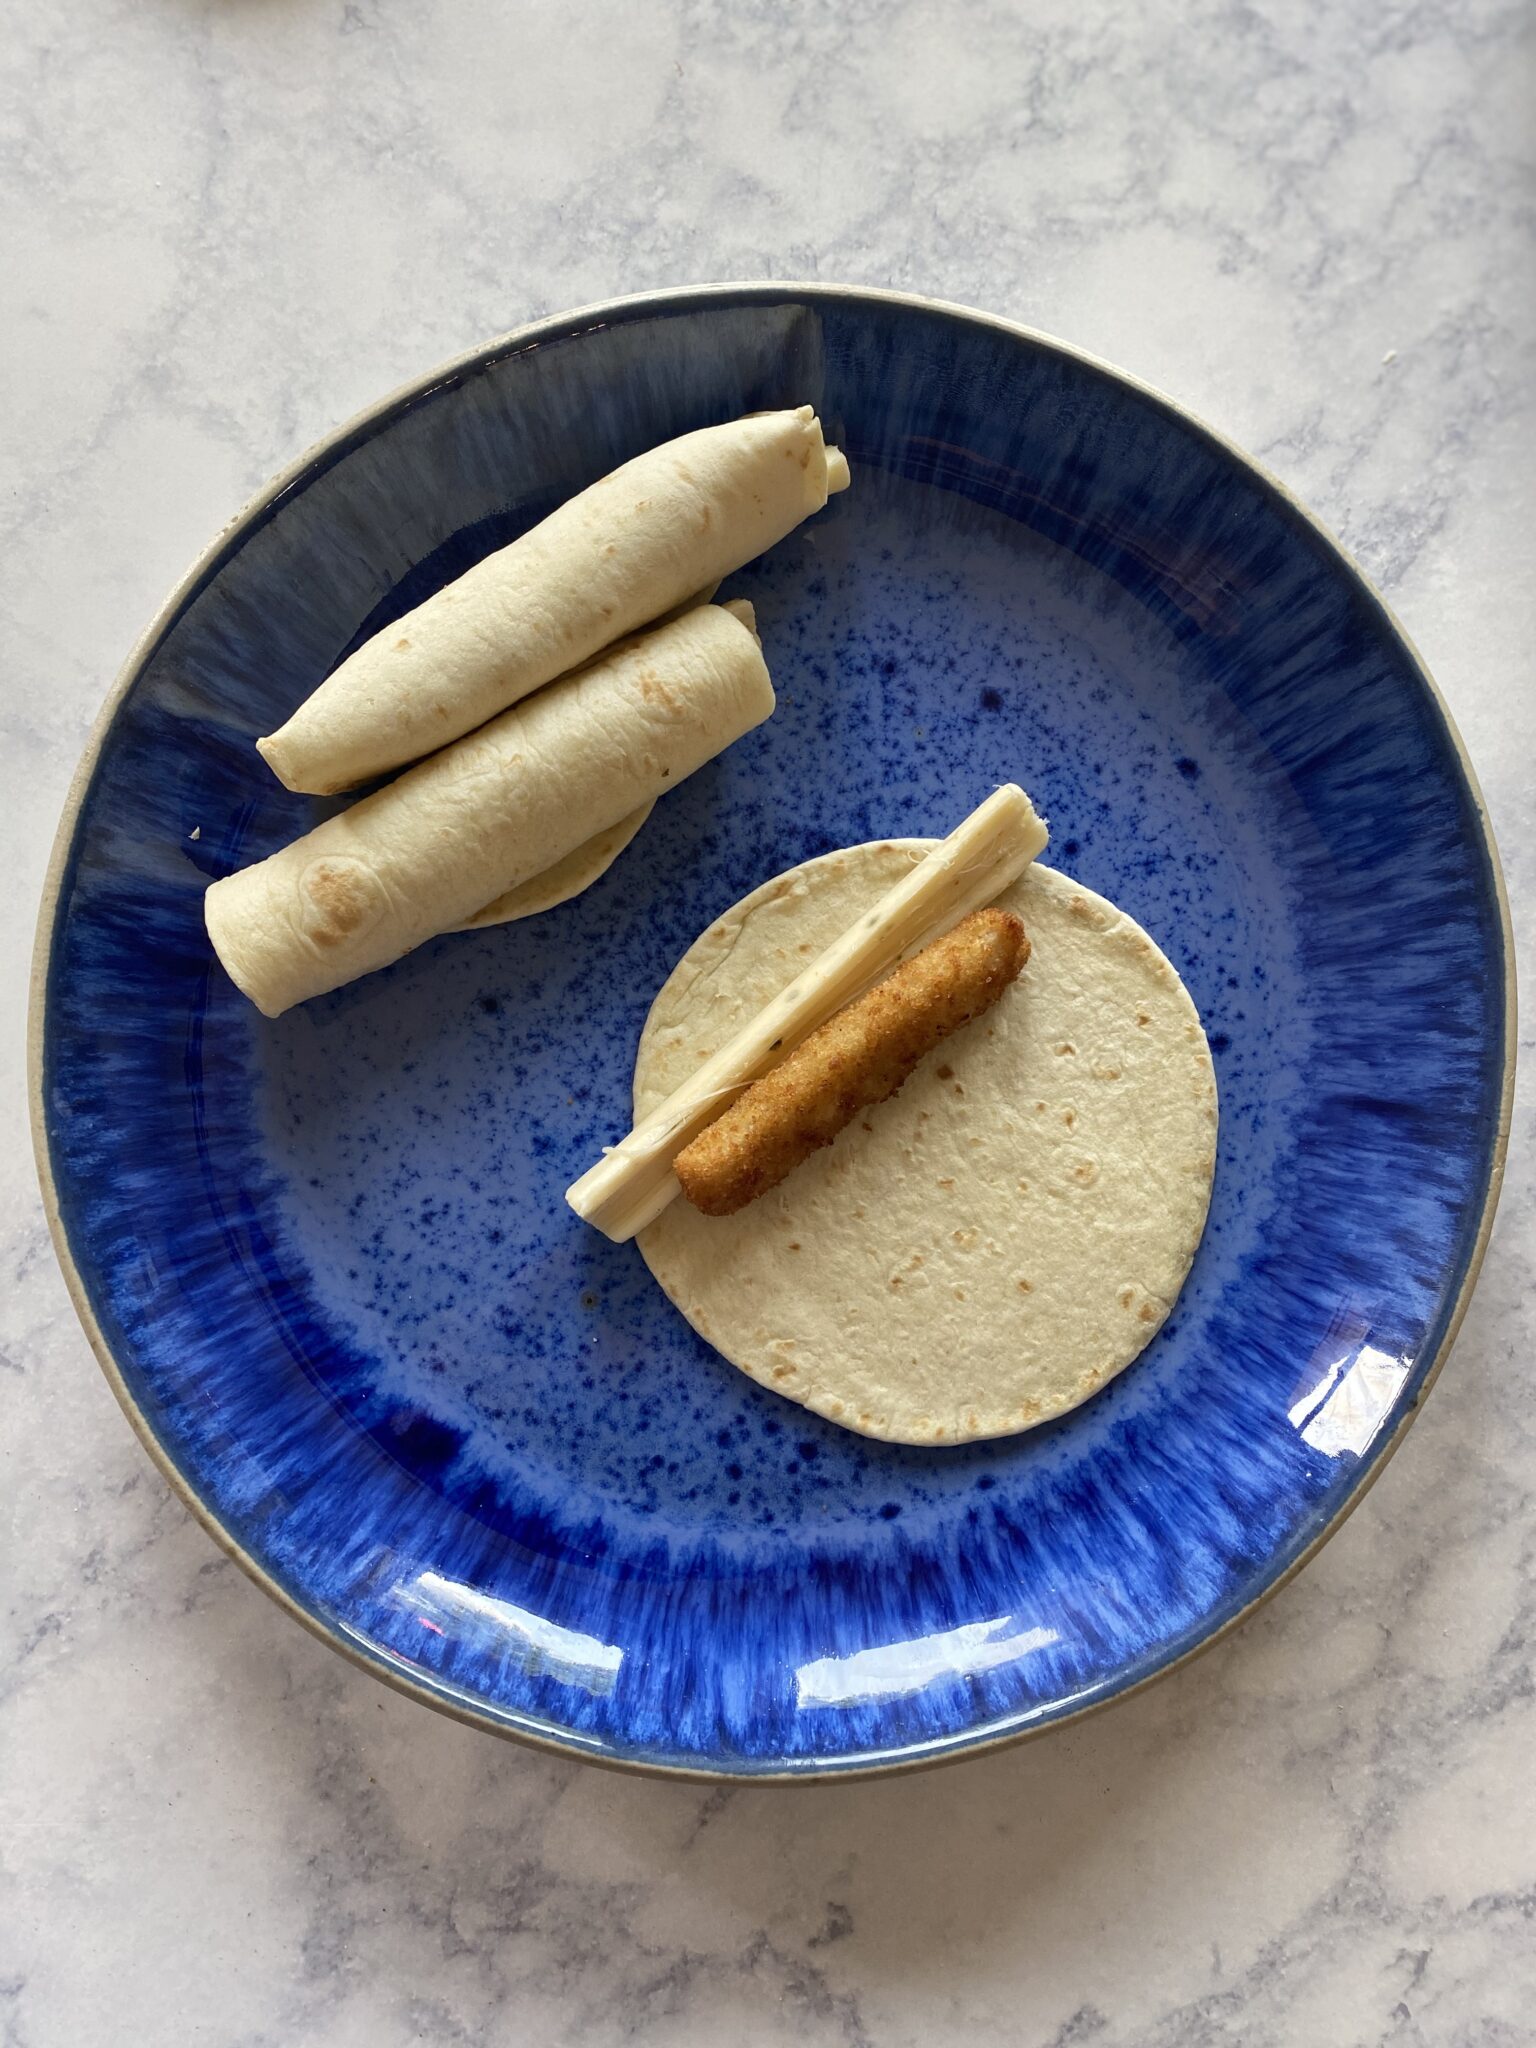 Fish stick and cheese stick in a tortilla with 2 rolled up, on a blue plate